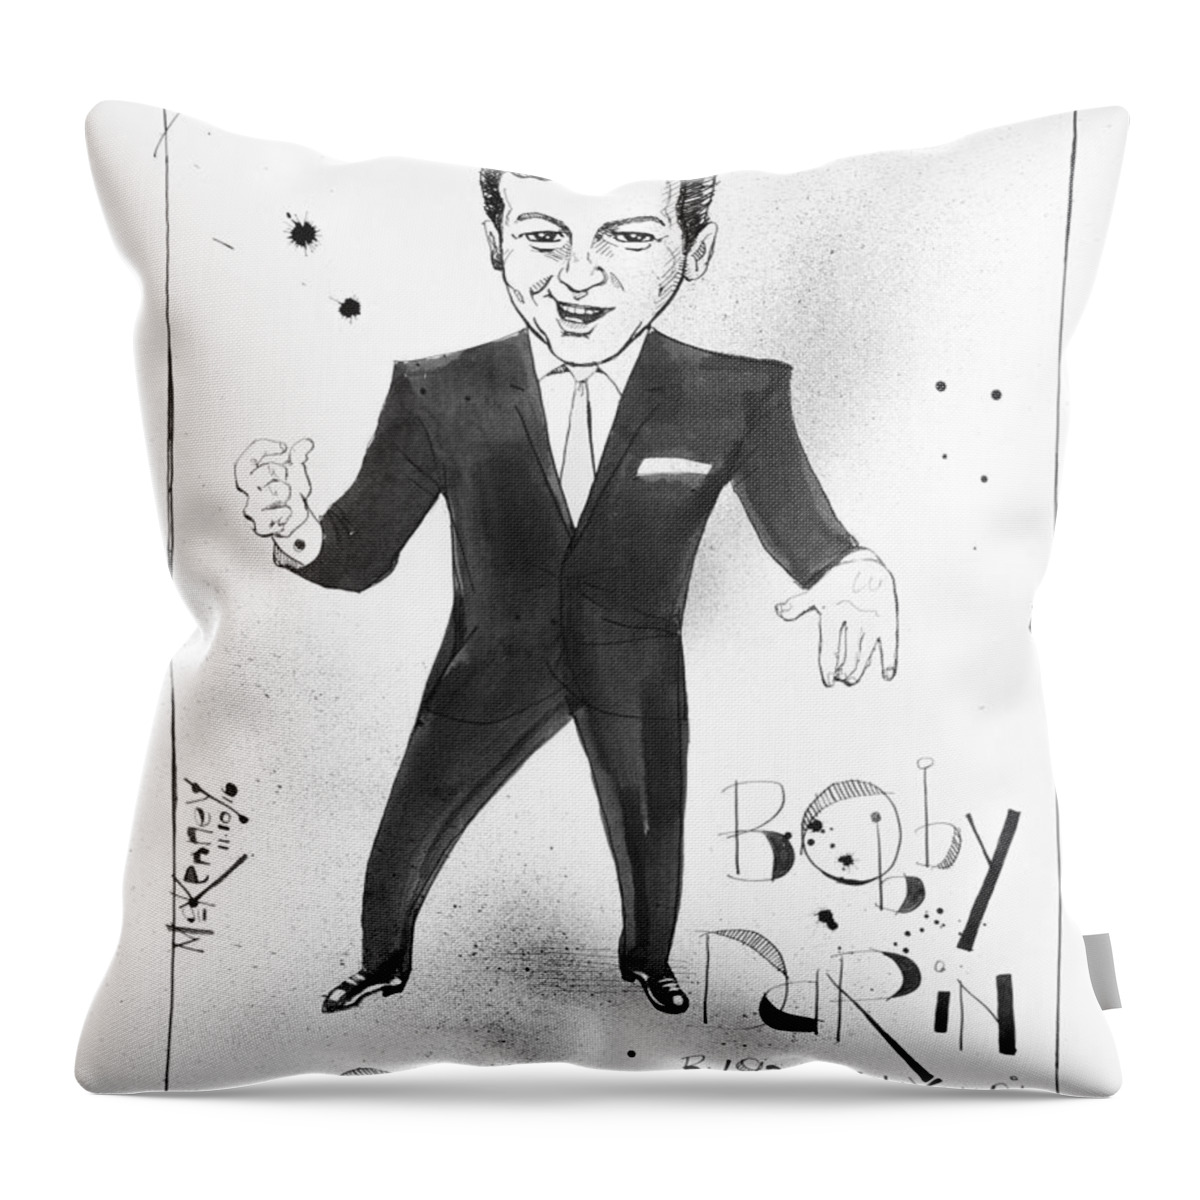  Throw Pillow featuring the drawing Bobby Darin by Phil Mckenney